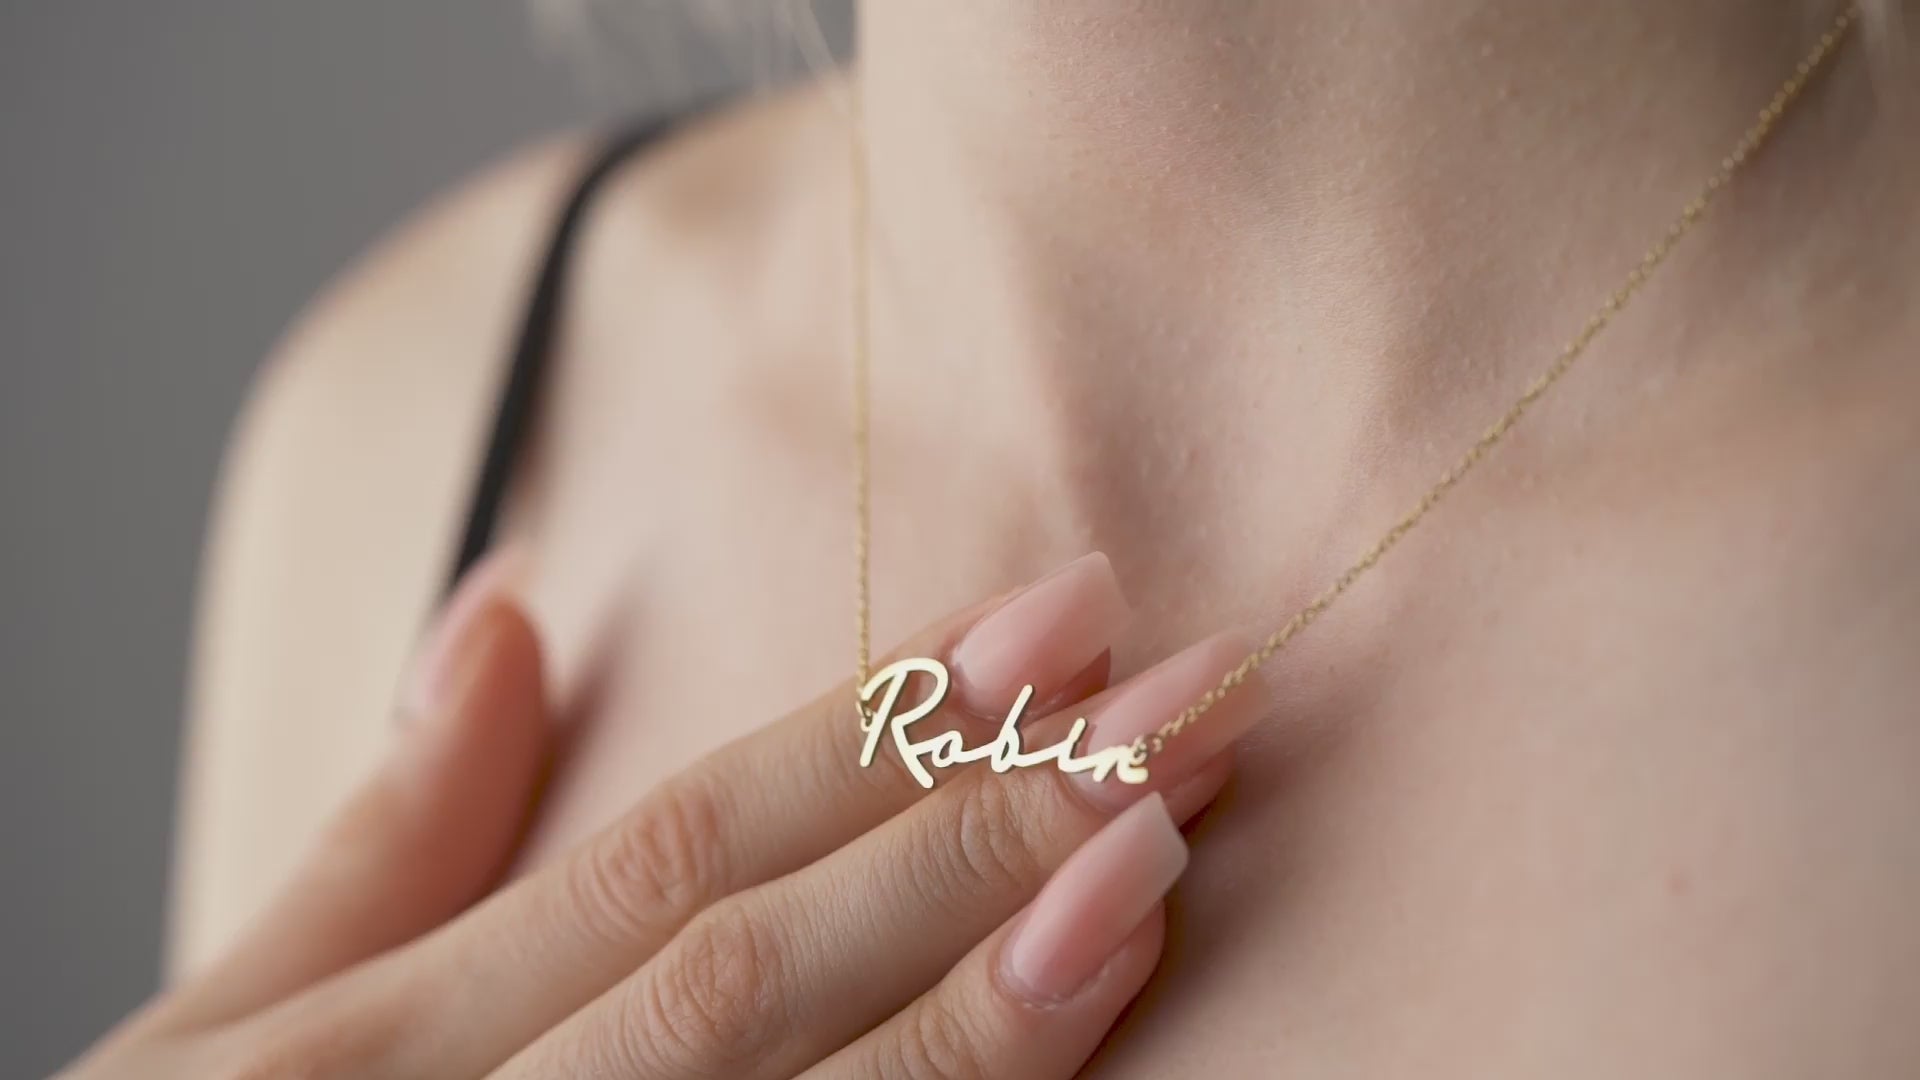 Signature Name Necklace 925 Sterling Silver